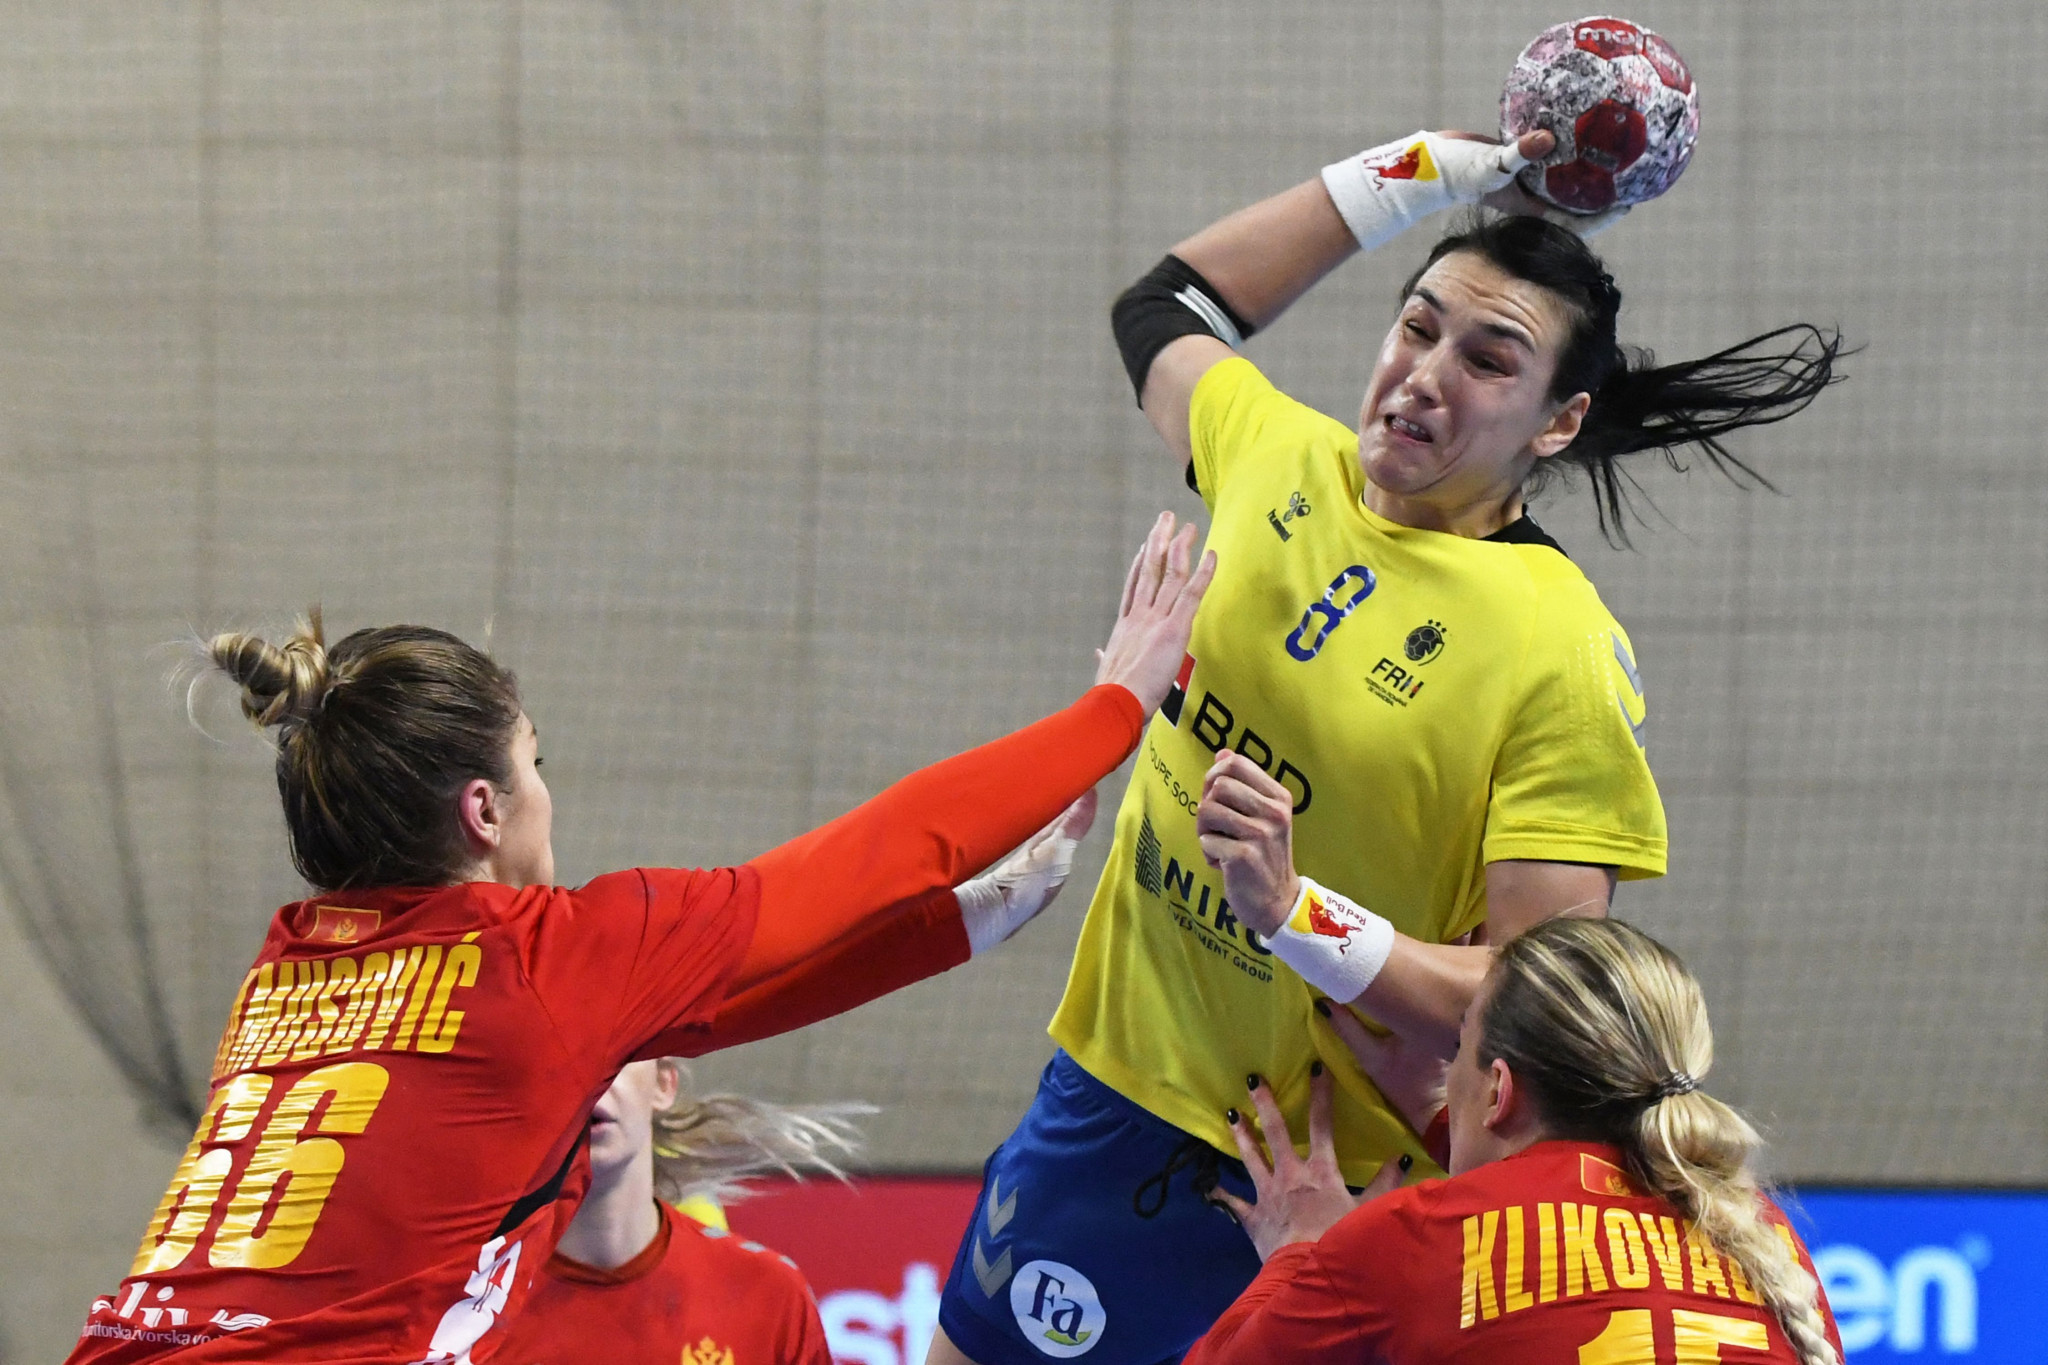 Romania (yellow shirts) were left to reflect what might have been as they missed out on qualifying for the Tokyo 2020 women's handball competition despite beating Montenegro ©Getty Images